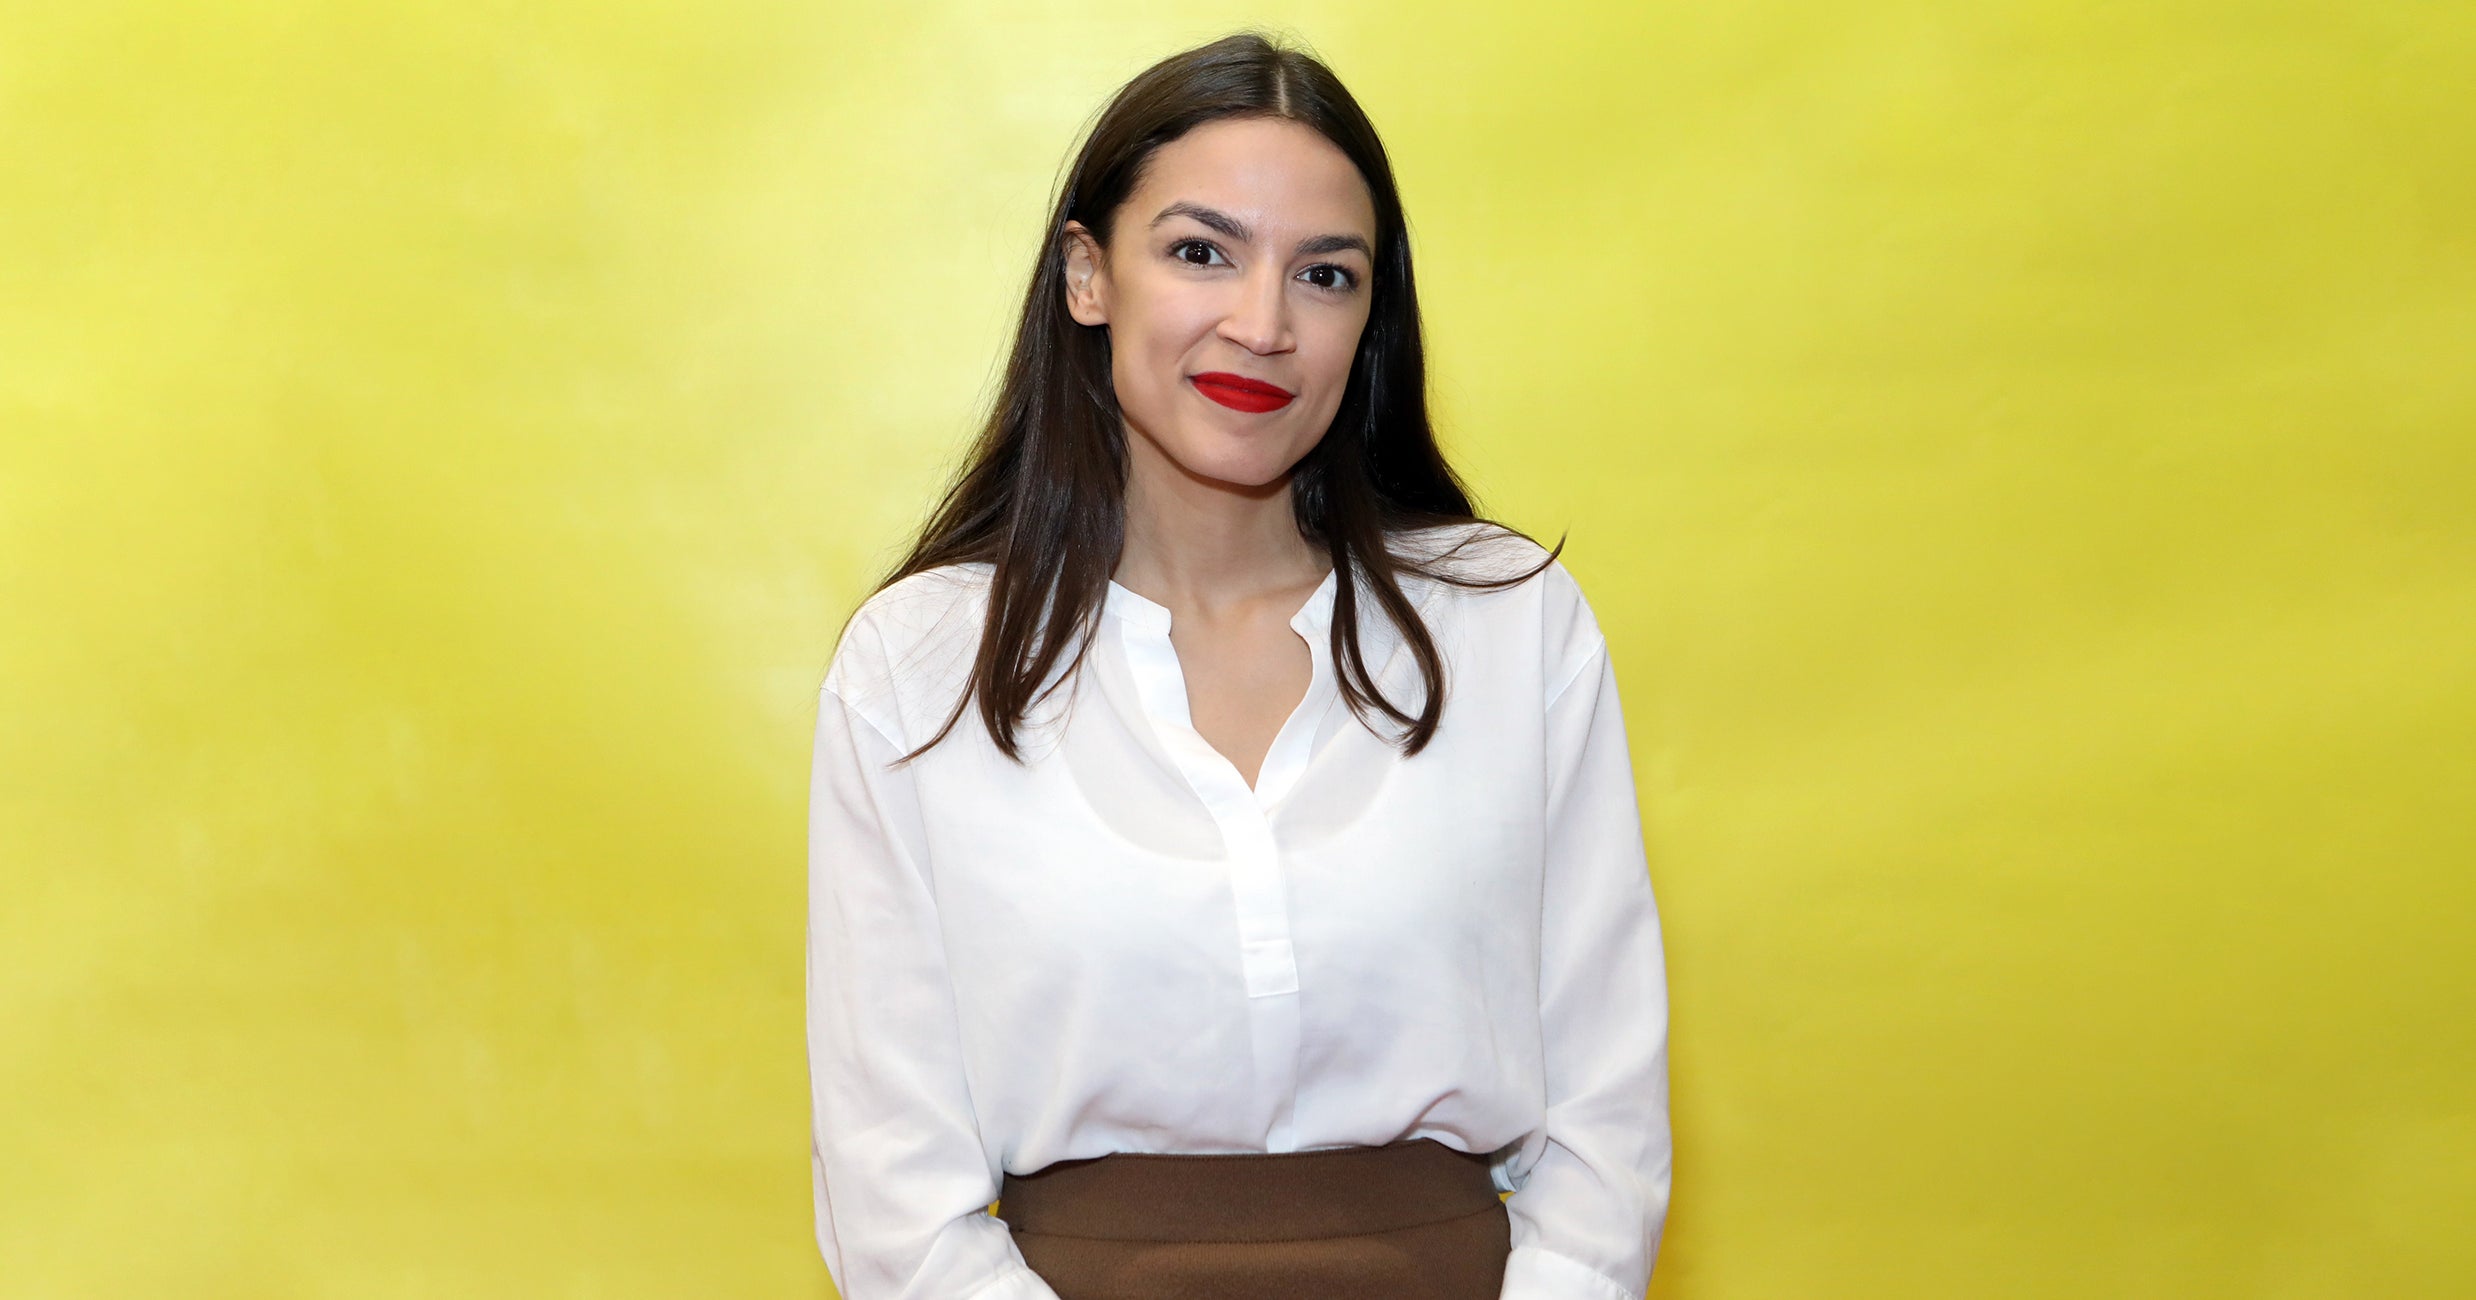 Alexandria Ocasio-Cortez Reveals Her Full Beauty Routine — & Why It Matters